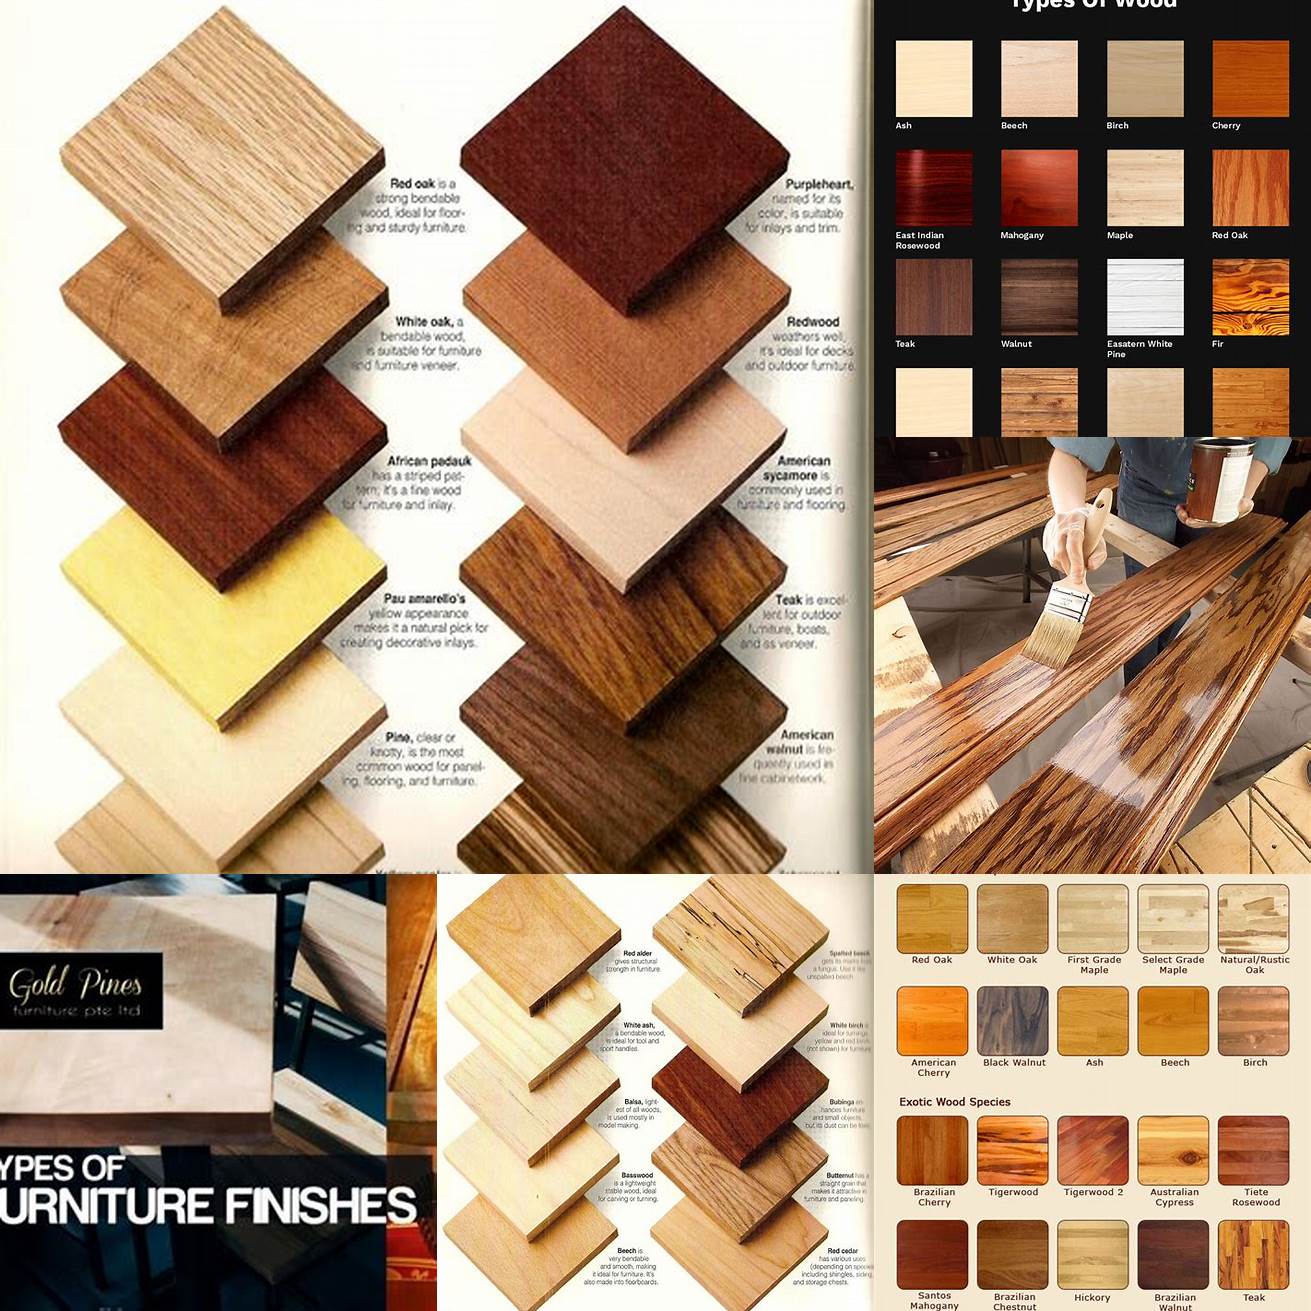 Variety of Finishes